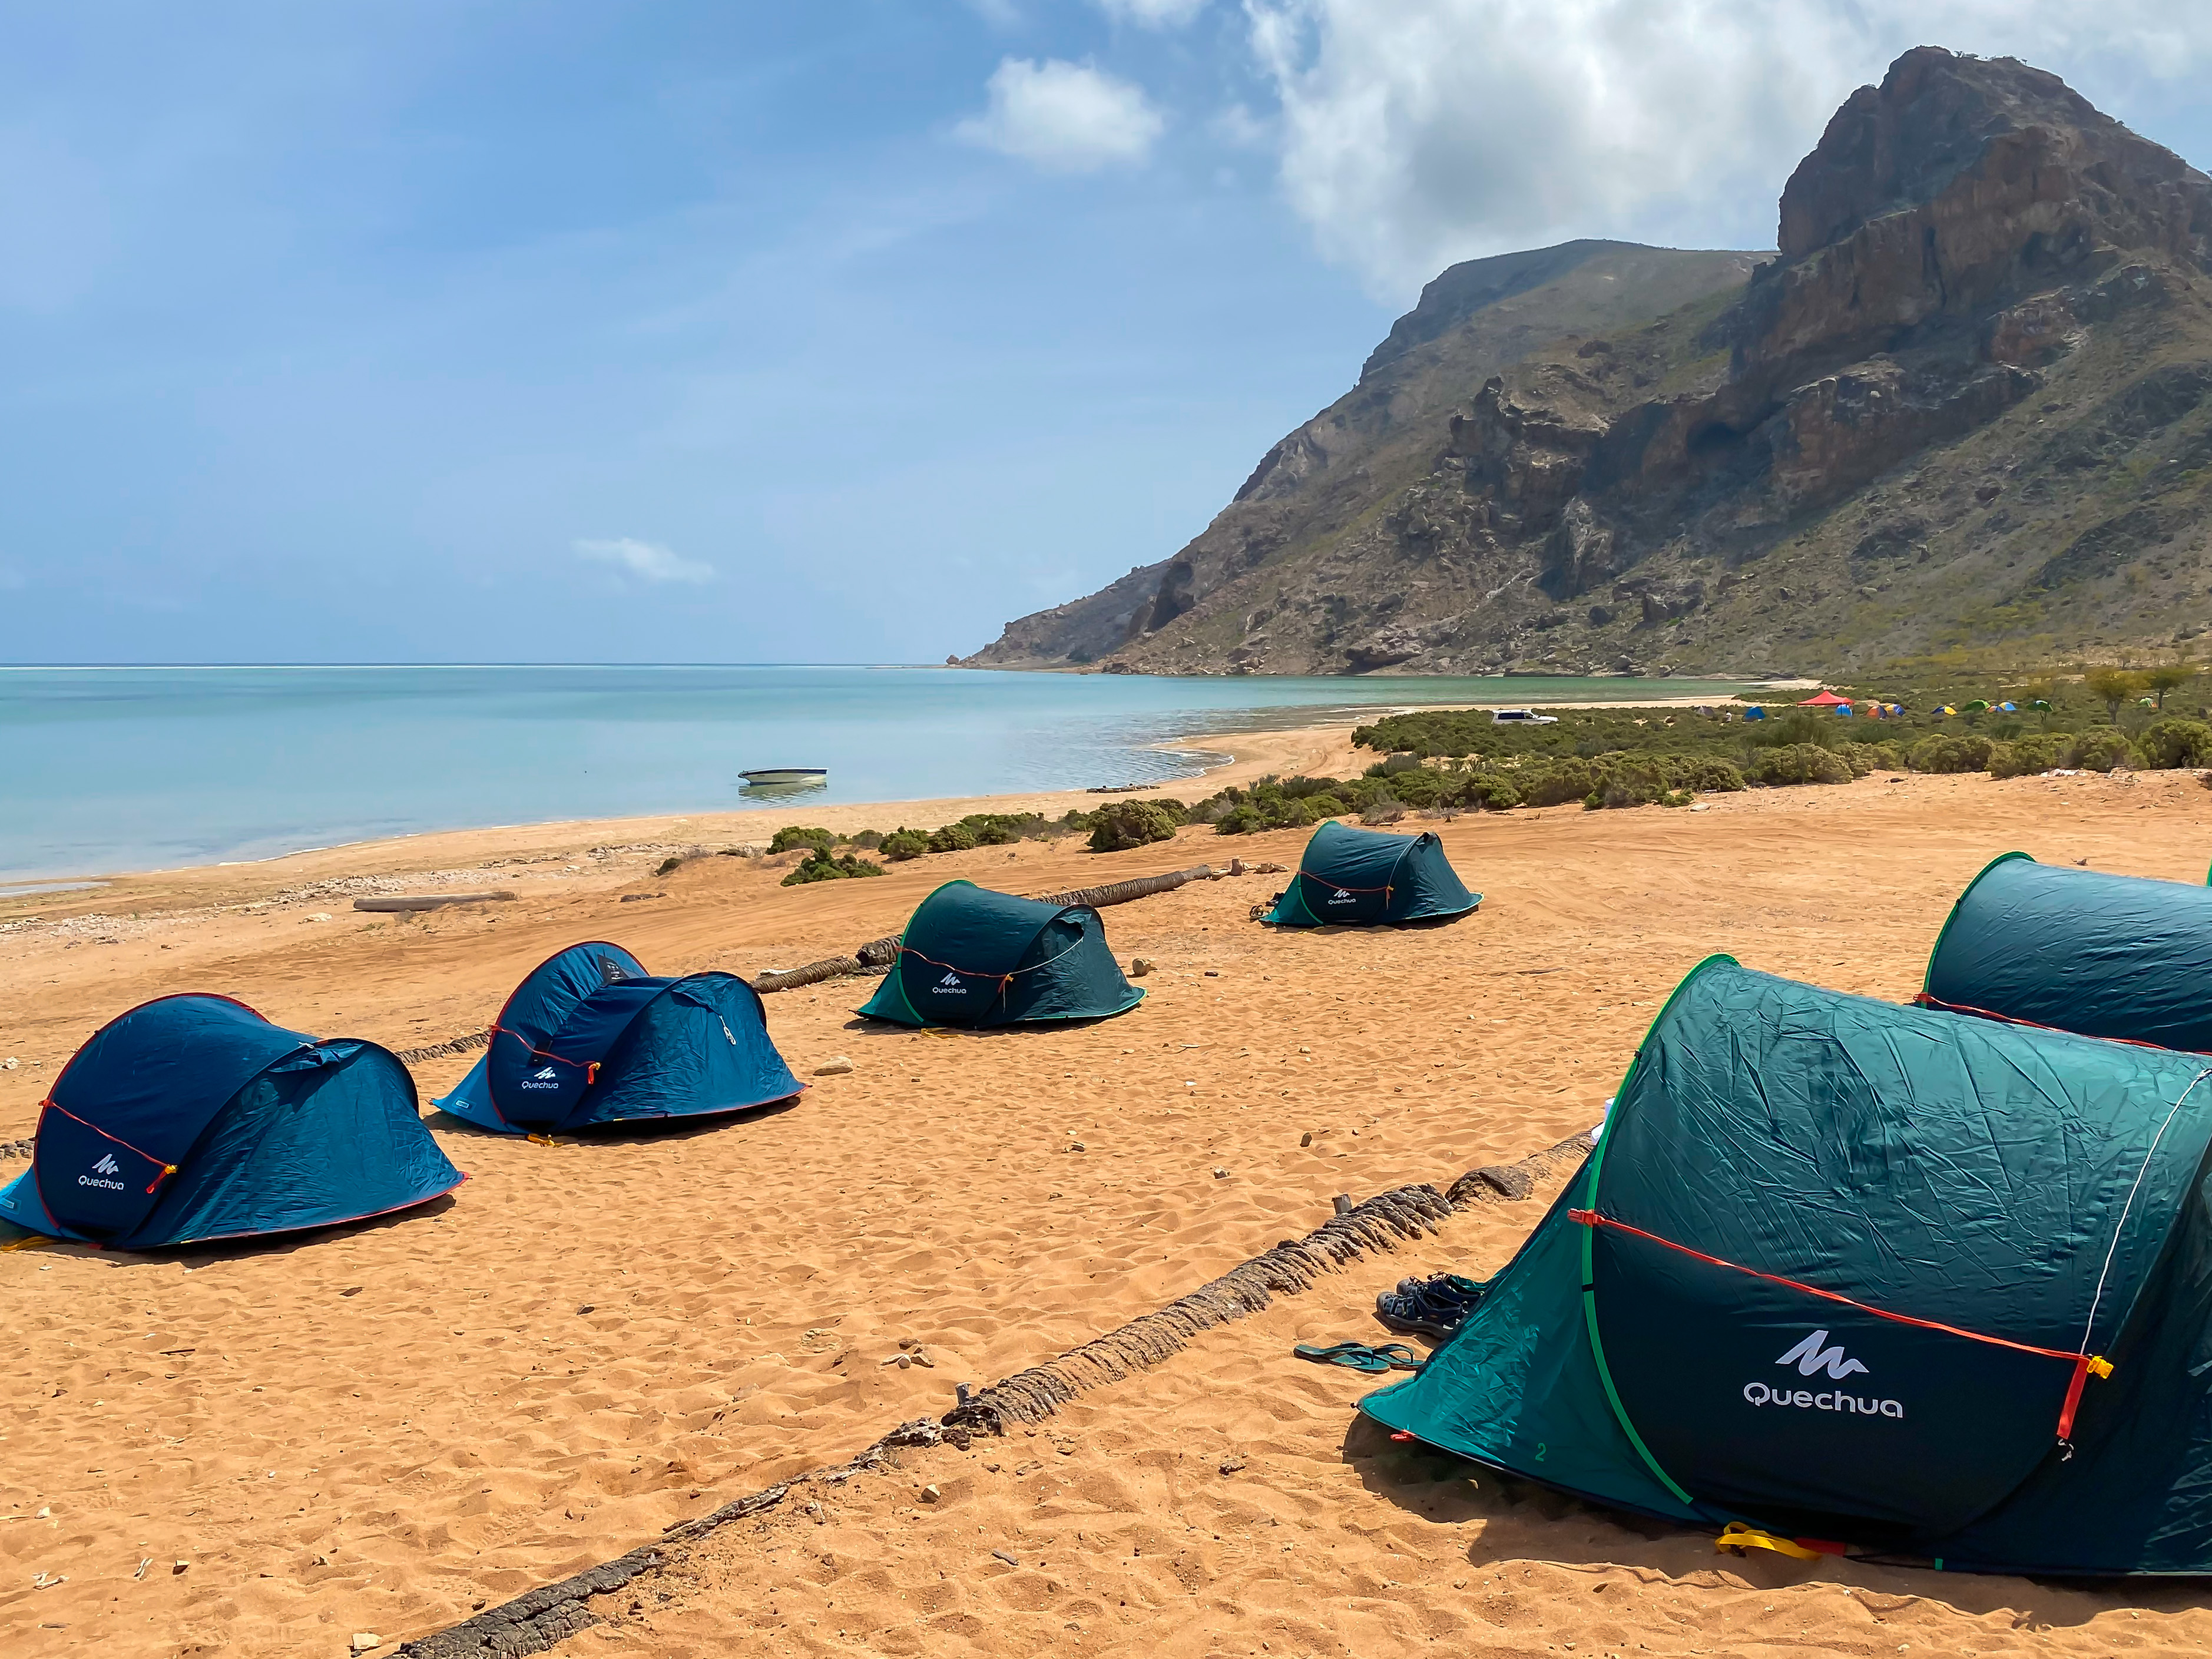 Explore Socotra - Travel to one of the most undiscovered places!